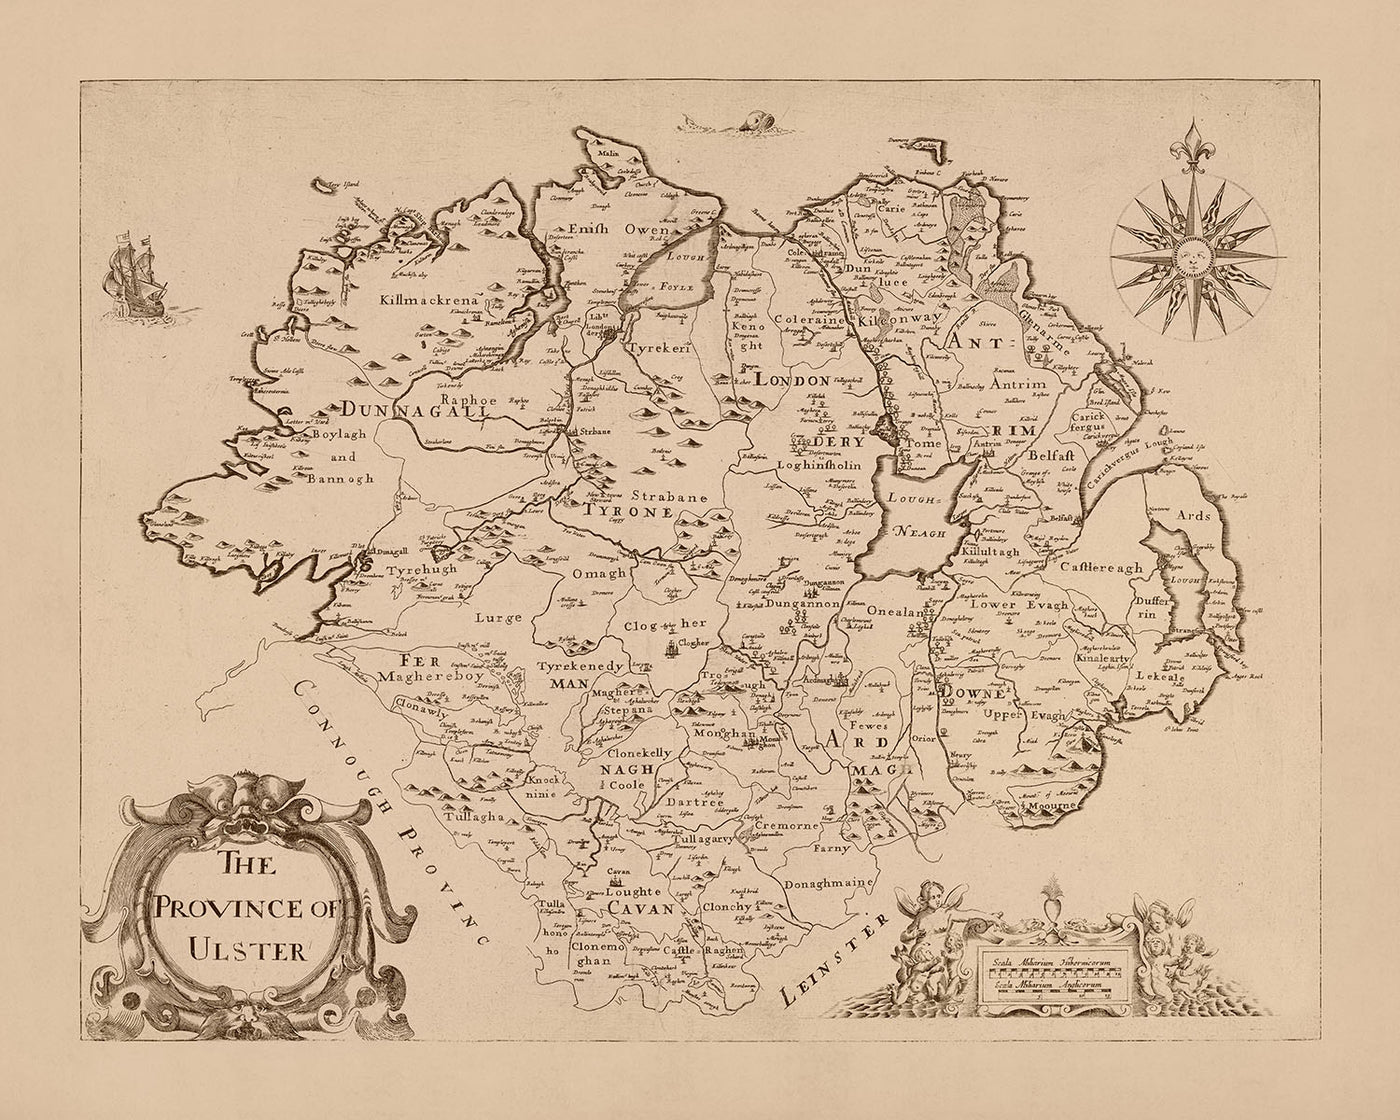 Old Map of Ulster by Petty, 1685: Armagh, Belfast, Londonderry, Donegal, Down, Antrim